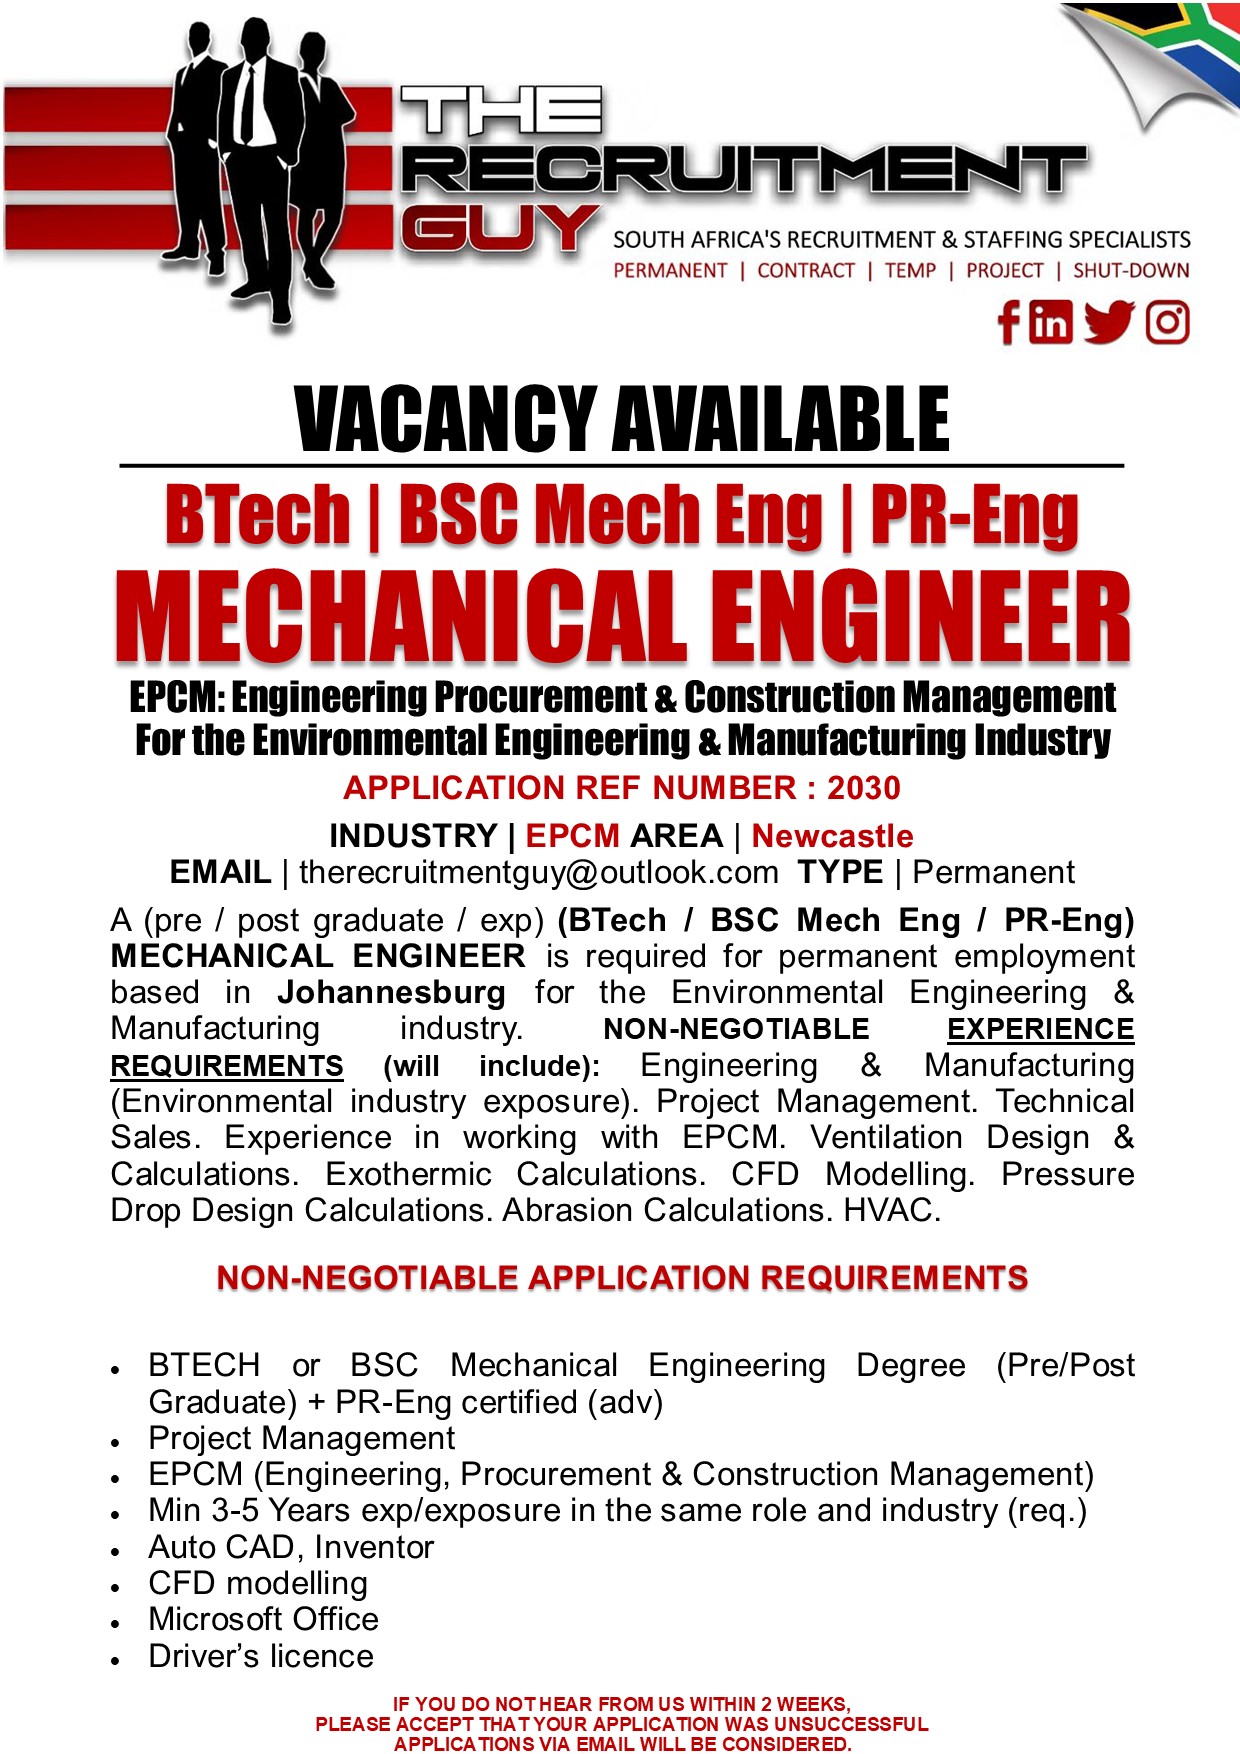 GN SOUTH AFRICA'S RECRUITMENT &amp; STAFFING SPECIALISTS

PERMANENT | CONTRACT | TEMP | PROJECT | SHUT-DOWN

{ink JG]

 

VACANCY AVAILABLE
BTech | BSC Mech Eng | PR-Eng

MECHANICAL ENGINEER

EPCM: Engineering Procurement &amp; Construction Management
For the Environmental Engineering &amp; Manufacturing Industry
APPLICATION REF NUMBER : 2030

INDUSTRY | EPCM AREA | Newcastle
EMAIL | therecruitmentguy@outlook.com TYPE | Permanent

A (pre / post graduate / exp) (BTech / BSC Mech Eng / PR-Eng)
MECHANICAL ENGINEER is required for permanent employment
based in Johannesburg for the Environmental Engineering &amp;
Manufacturing industry. NON-NEGOTIABLE EXPERIENCE
REQUIREMENTS (will include): Engineering &amp; Manufacturing
(Environmental industry exposure). Project Management. Technical
Sales. Experience in working with EPCM. Ventilation Design &amp;
Calculations. Exothermic Calculations. CFD Modelling. Pressure
Drop Design Calculations. Abrasion Calculations. HVAC.

NON-NEGOTIABLE APPLICATION REQUIREMENTS

« BTECH or BSC Mechanical Engineering Degree (Pre/Post
Graduate) + PR-Eng certified (adv)

Project Management

EPCM (Engineering, Procurement &amp; Construction Management)
Min 3-5 Years exp/exposure in the same role and industry (req.)
Auto CAD, Inventor

CFD modelling

Microsoft Office

Driver's licence

IF YOU DO NOTHEAR FROM US WITHIN 2 WEEKS,
PLEASE ACCEPT THAT YOUR APPLICATION WAS UNSUCCESSFUL
APPLICATIONS VIA EMAIL WILL BE CONSIDERED.